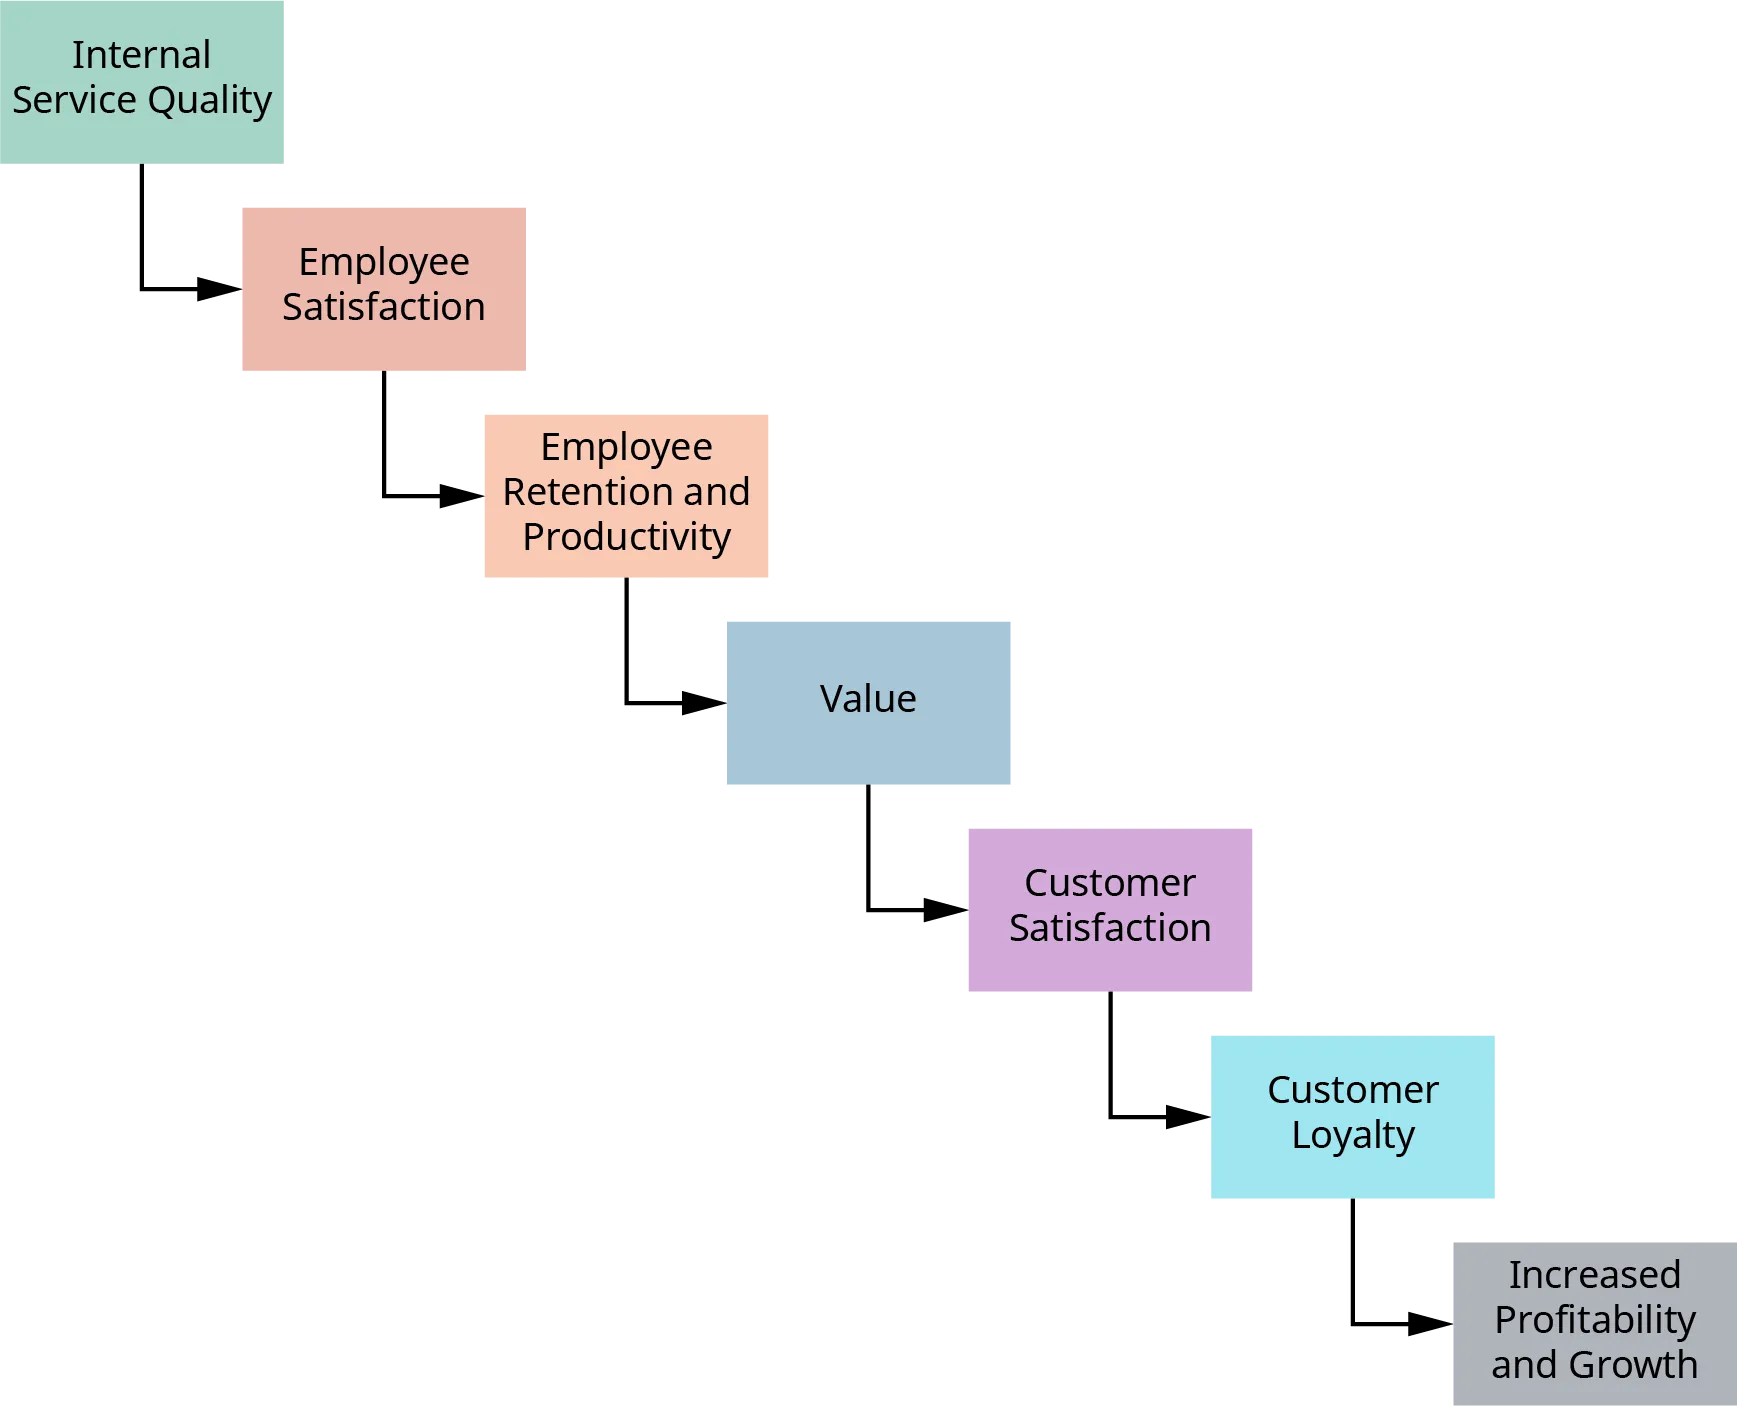 The service profit chain model shows the links between profitability, employee satisfaction, loyalty, and productivity. Increased profitability and growth depend on customer loyalty, which depends on customer satisfaction, which depends on value, which depends on employee retention and productivity, which depends on employee satisfaction, which depends on internal service quality.